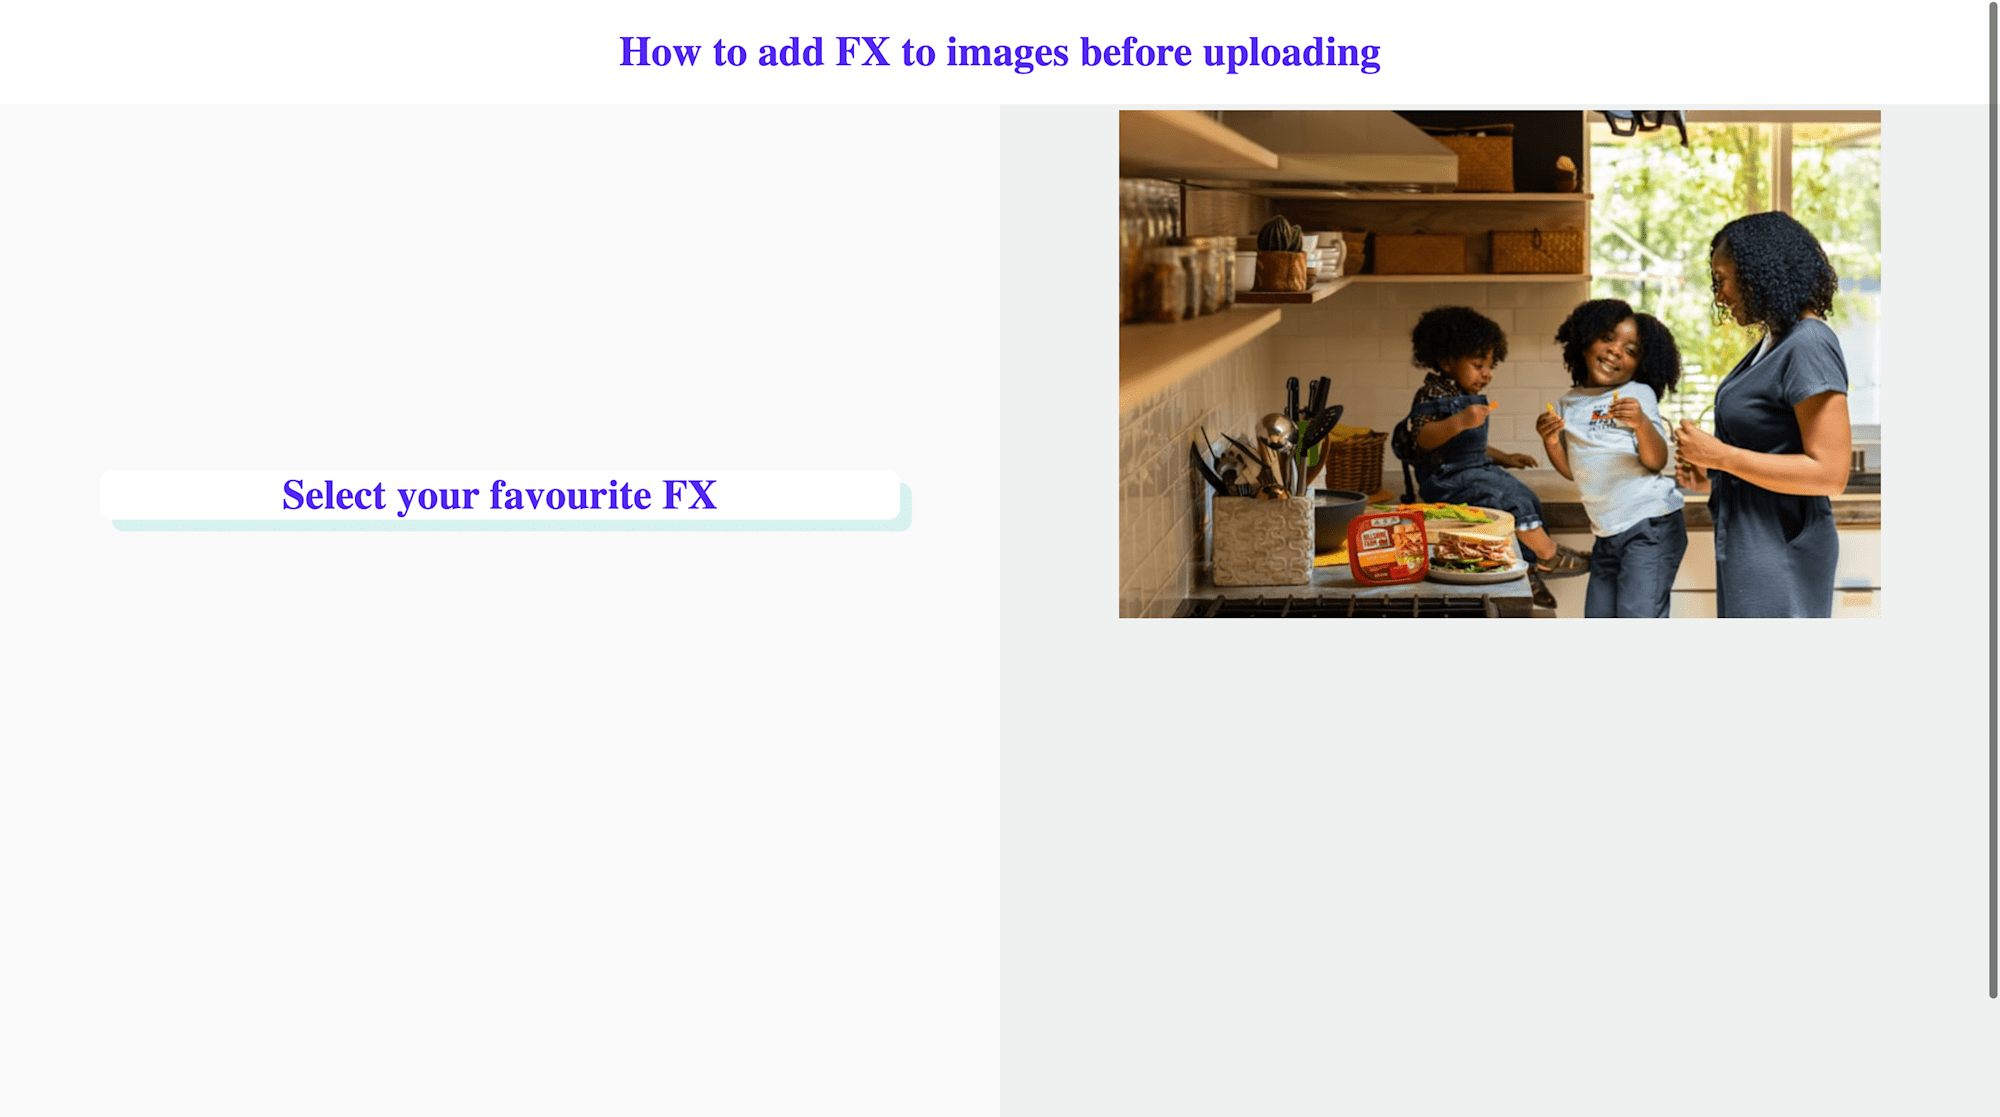 How to add FX to images before uploading